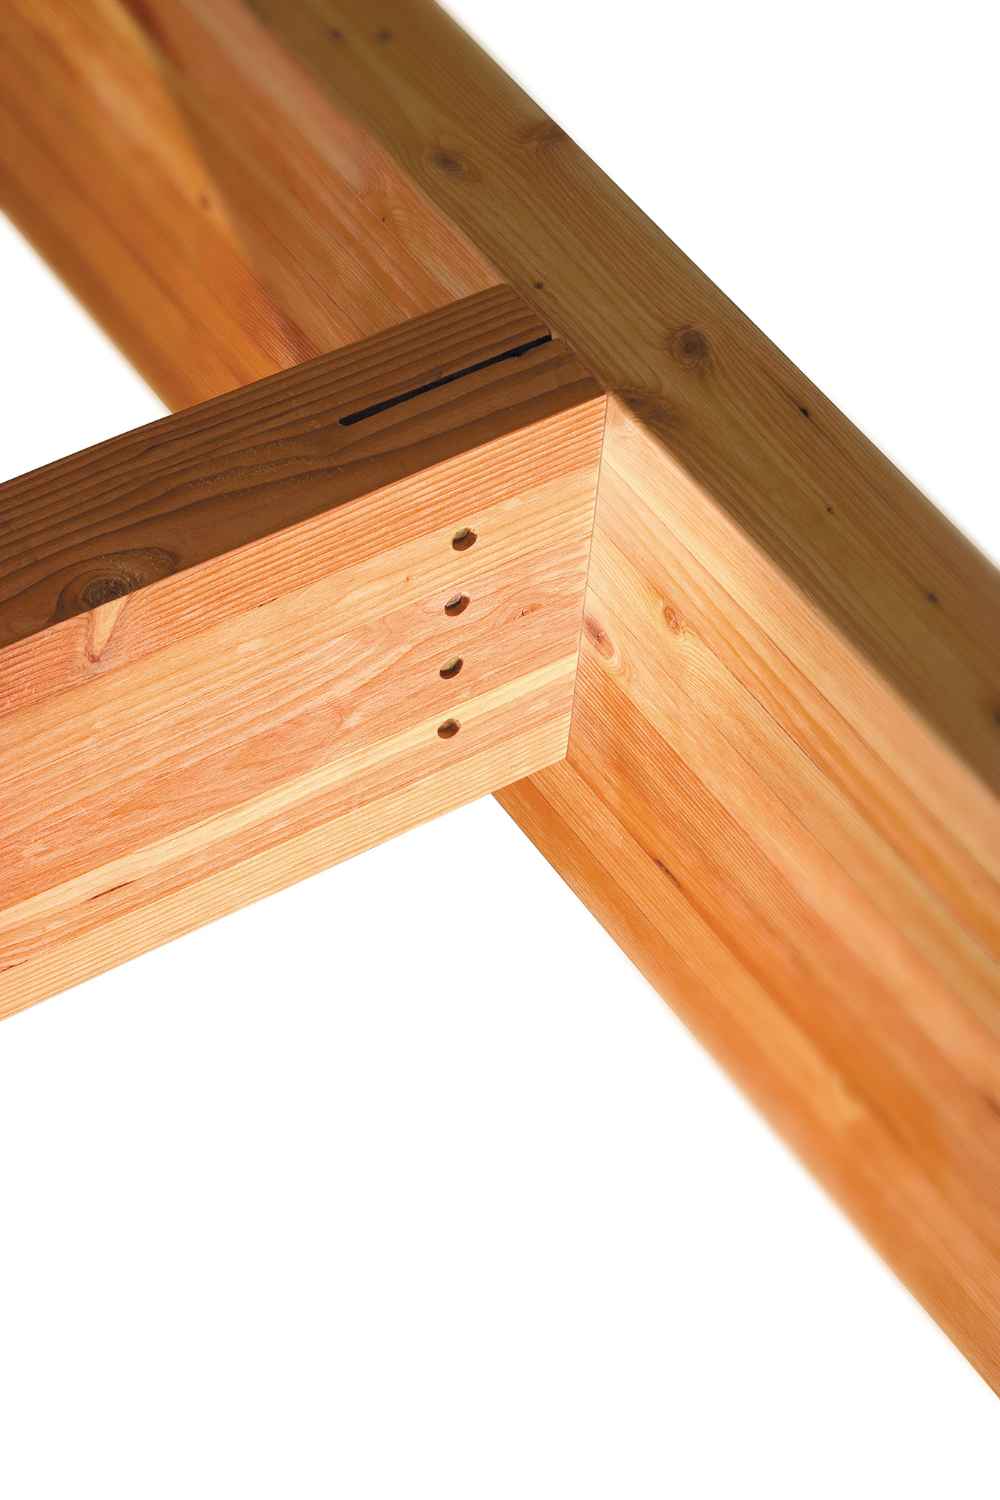 Simpson CJT4ZS Concealed Joist Tie w Short Pins ZMAX Finish image 4 of 5